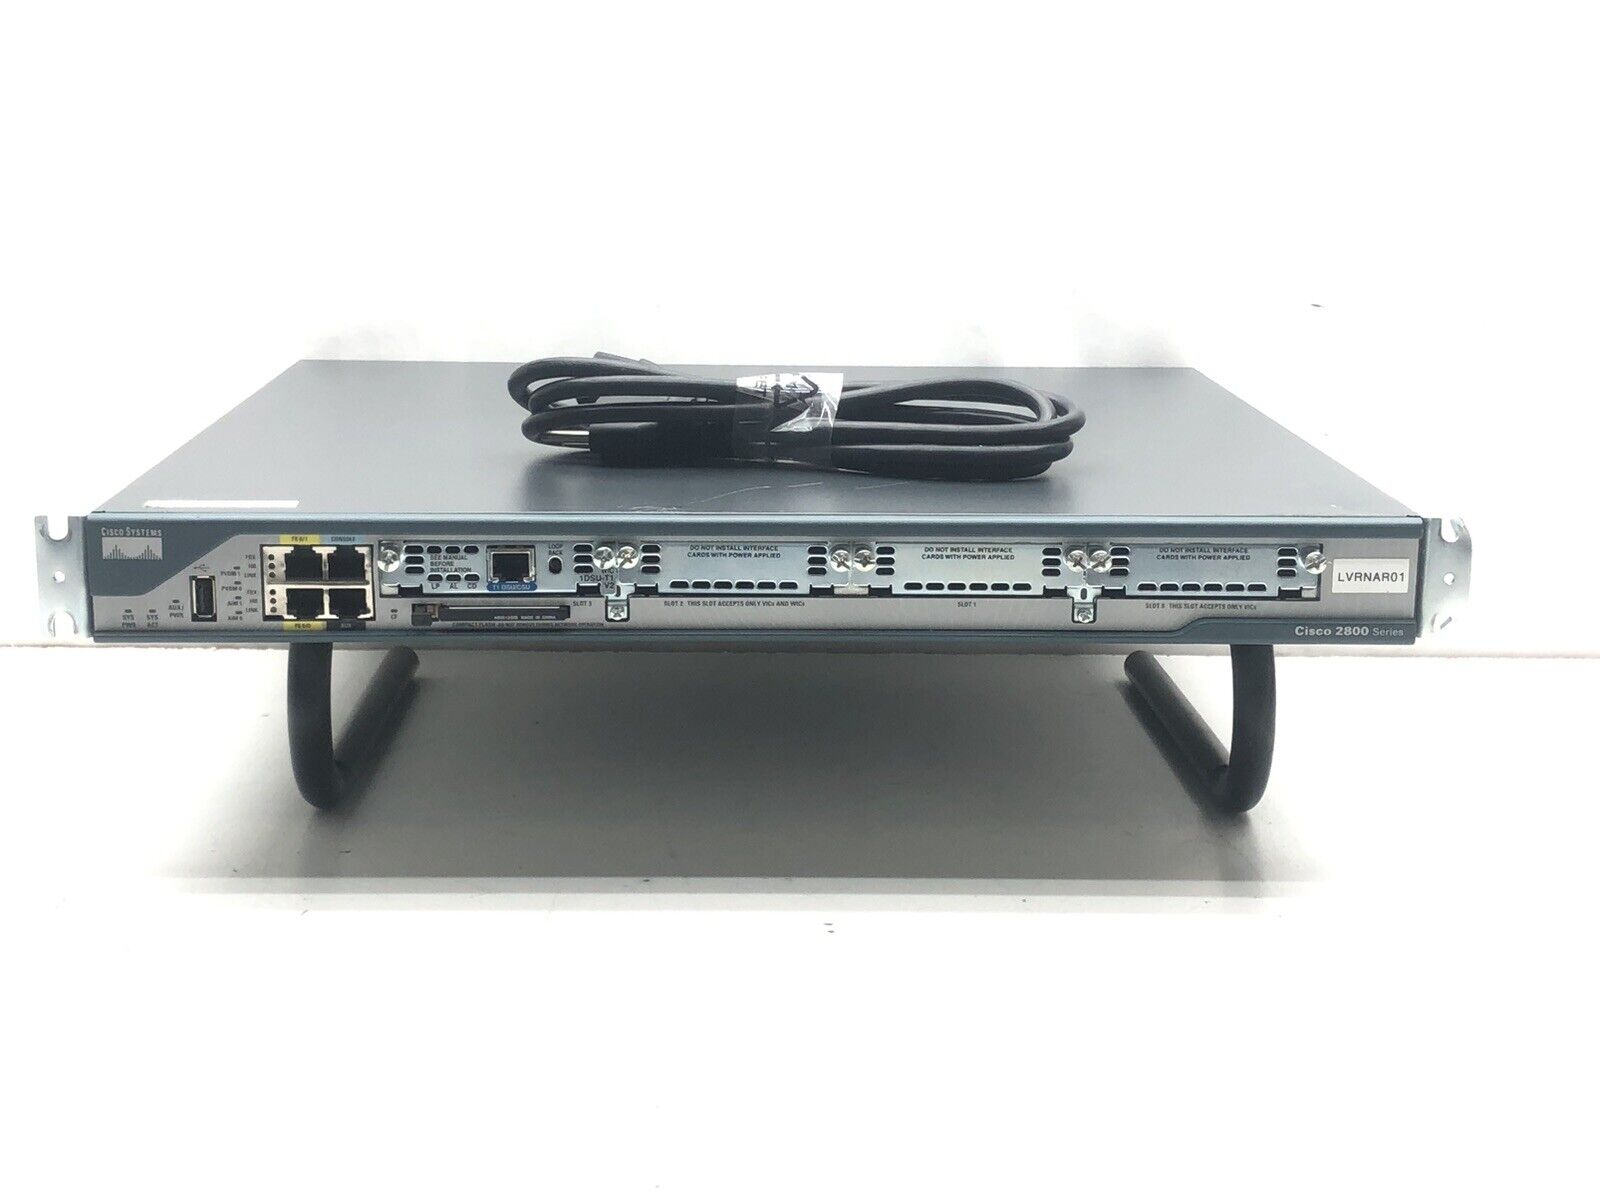 CISCO 2800 Series 2801 Integrated Services Router w/64MB Flash, VWIC2-2MFT-T1-E1